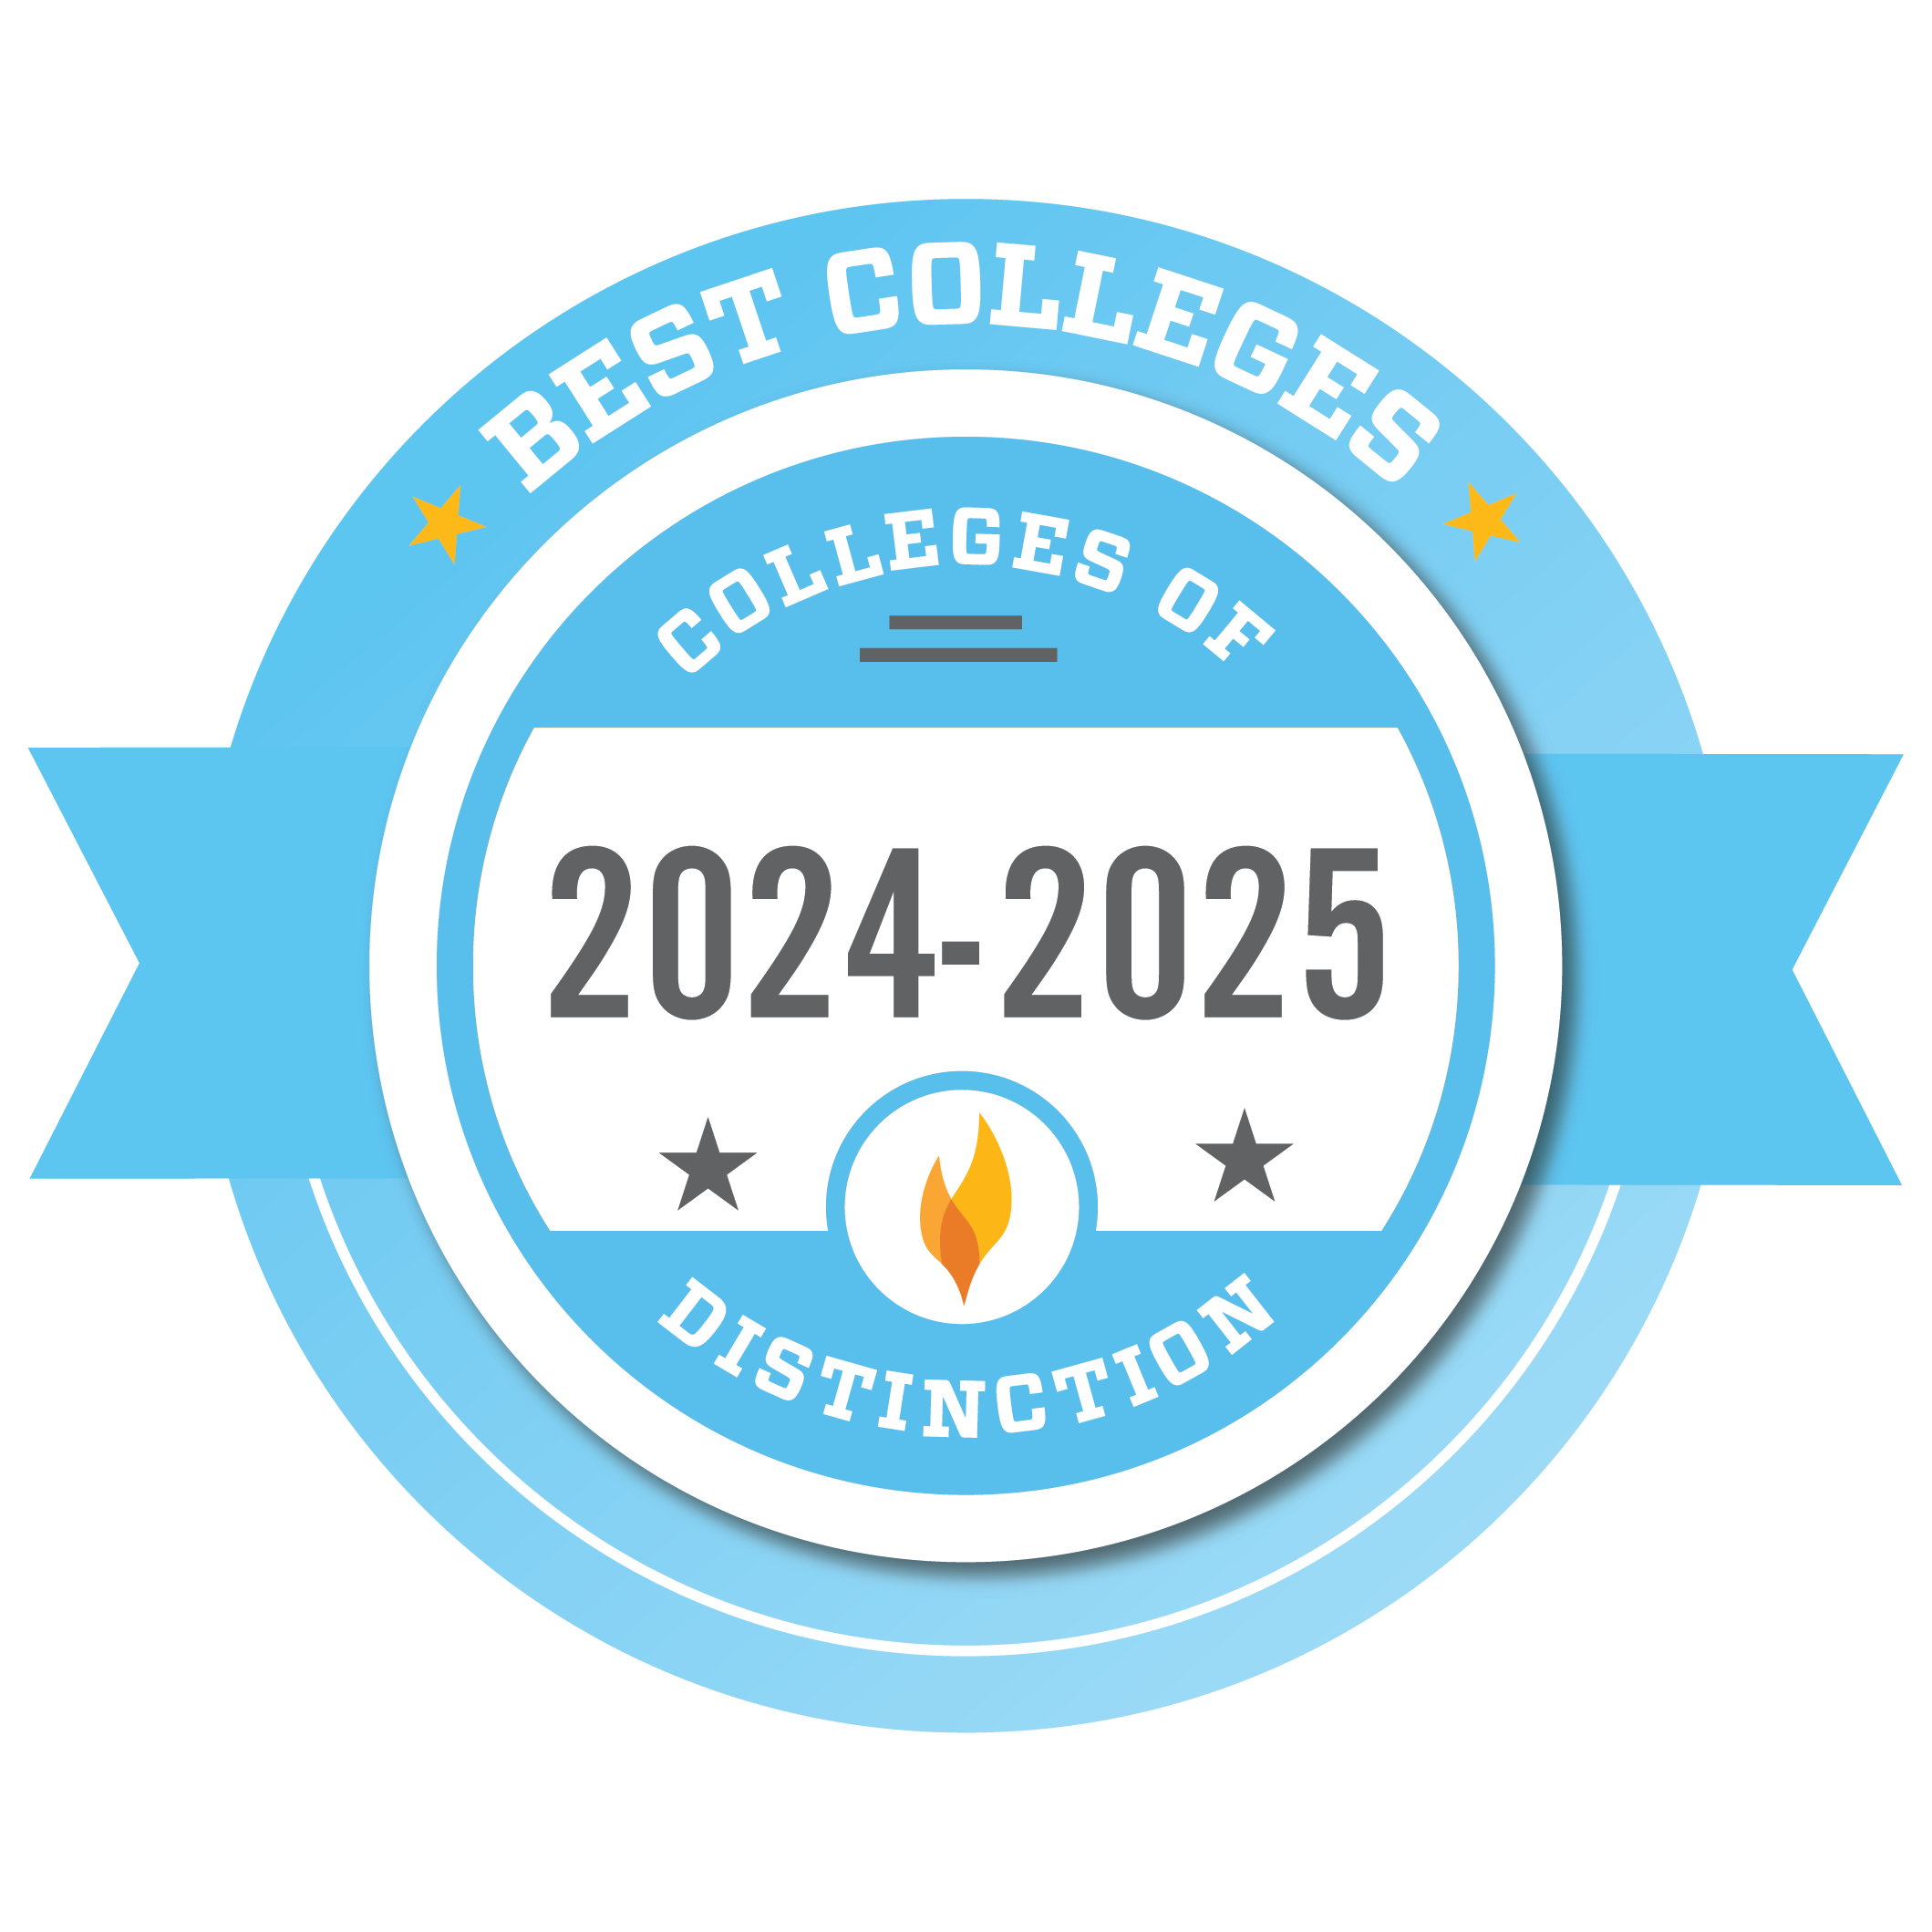 Colleges of Distinction logo for 2024 - 2025